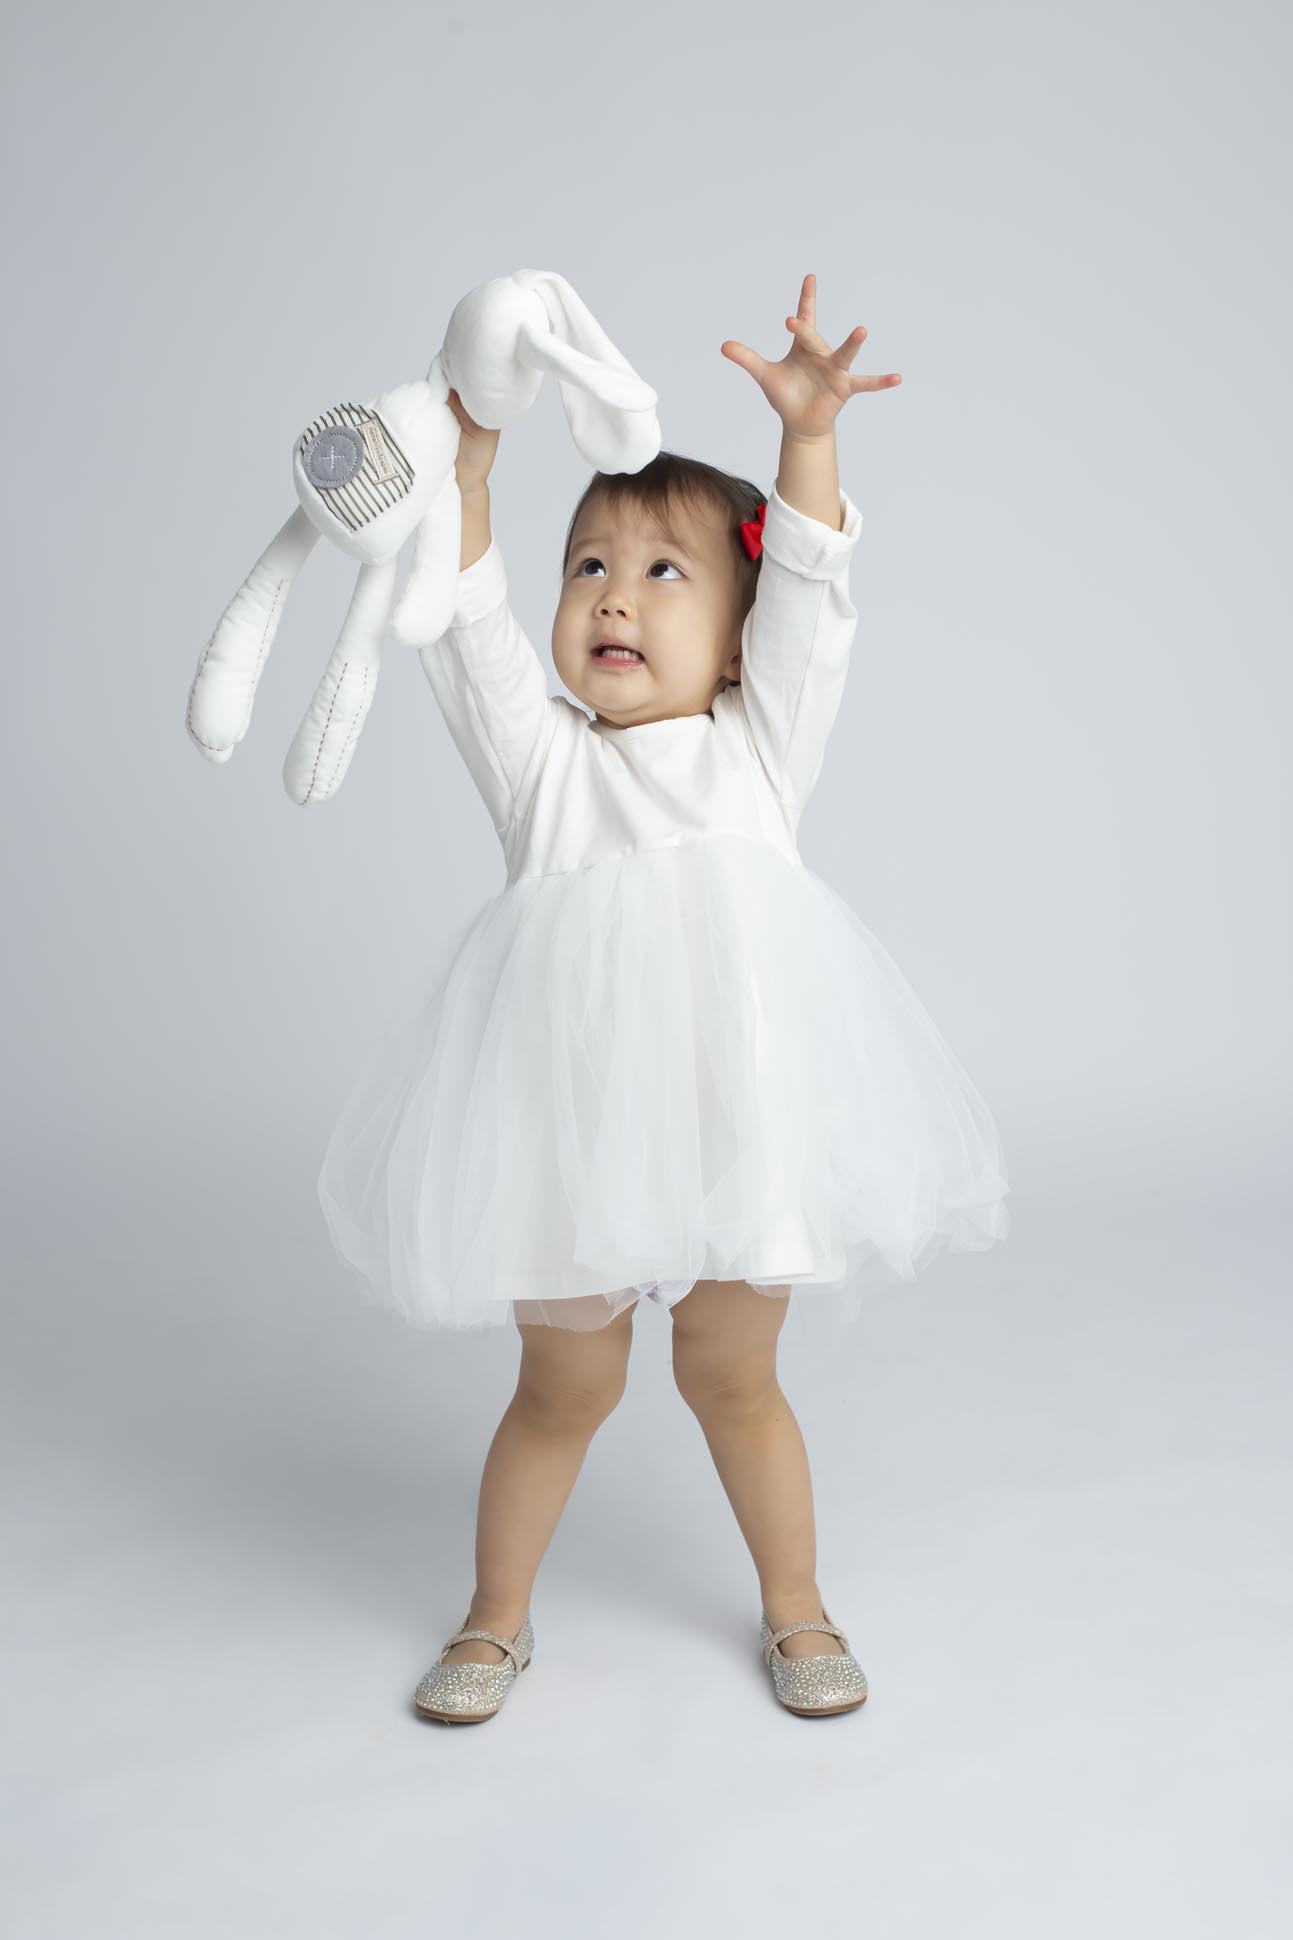 Dallas child photographer displays portrait of young girl in white dress holding a play bunny during indoor portrait photography session